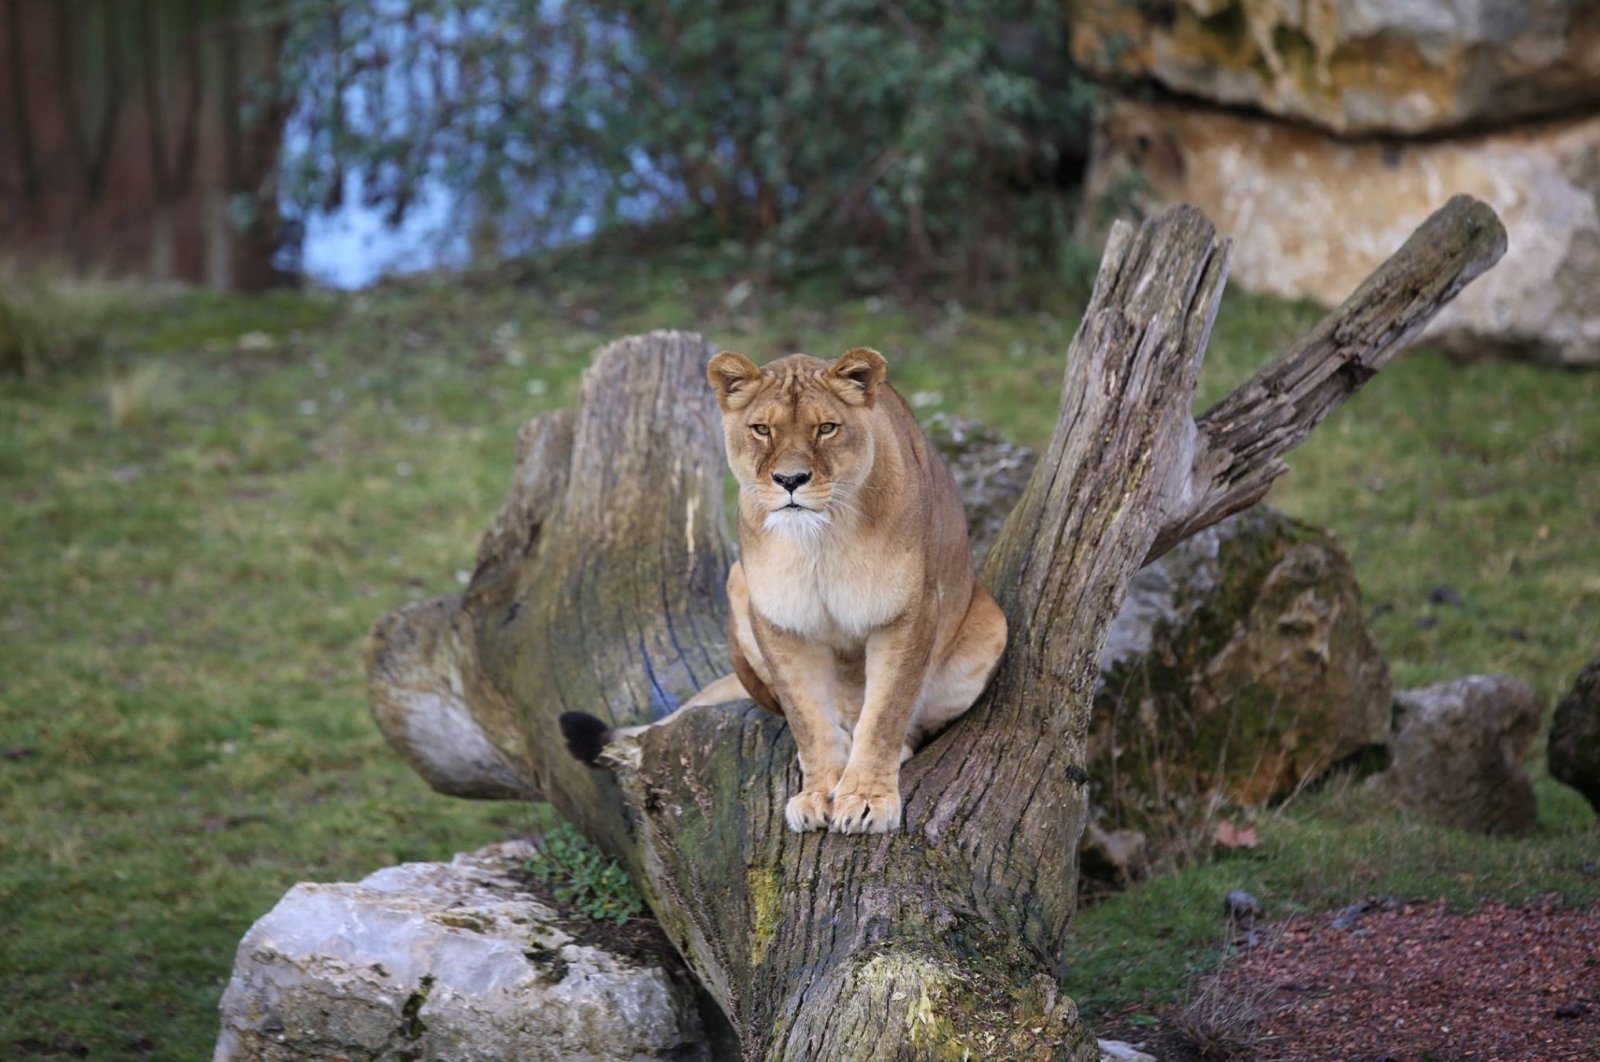 The lioness Dana, that has tested positive for COVID-19, is seen at Pairi Daiza Zoo park in Brugelette, Belgium, in this undated handout photo released on Dec. 15, 2021. (Pairi Daiza / Handout via Reuters)